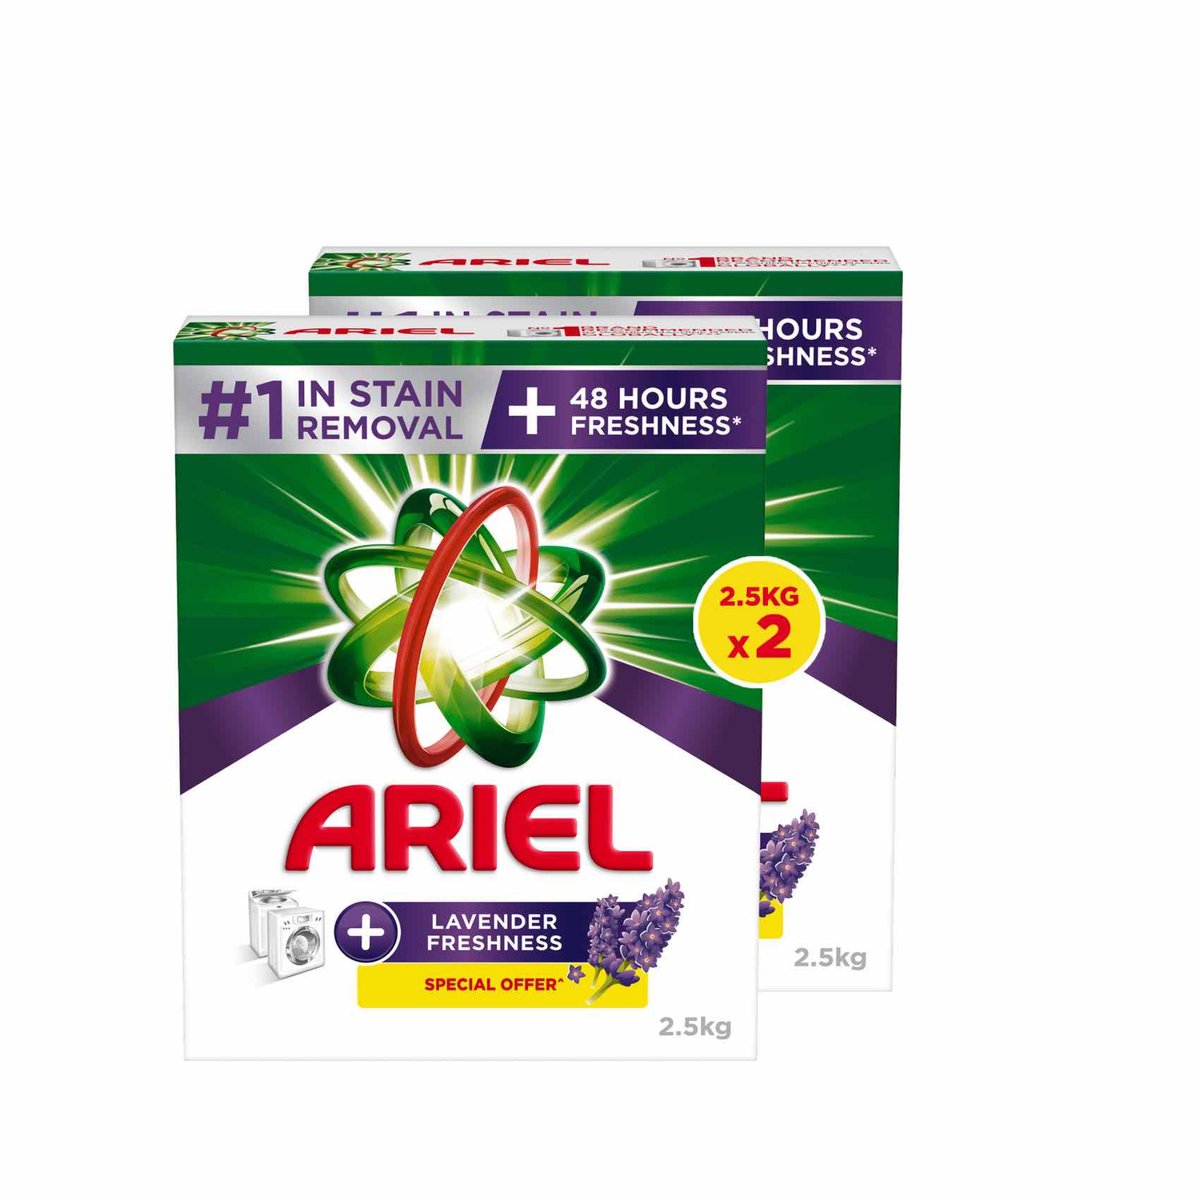 Buy Ariel Automatic Lavender Laundry Detergent Powder, Number 1 in Stain Removal with 48 Hours of Freshness, 2 x 2.5 kg Online at Best Price | Front load washing powders | Lulu Kuwait in UAE